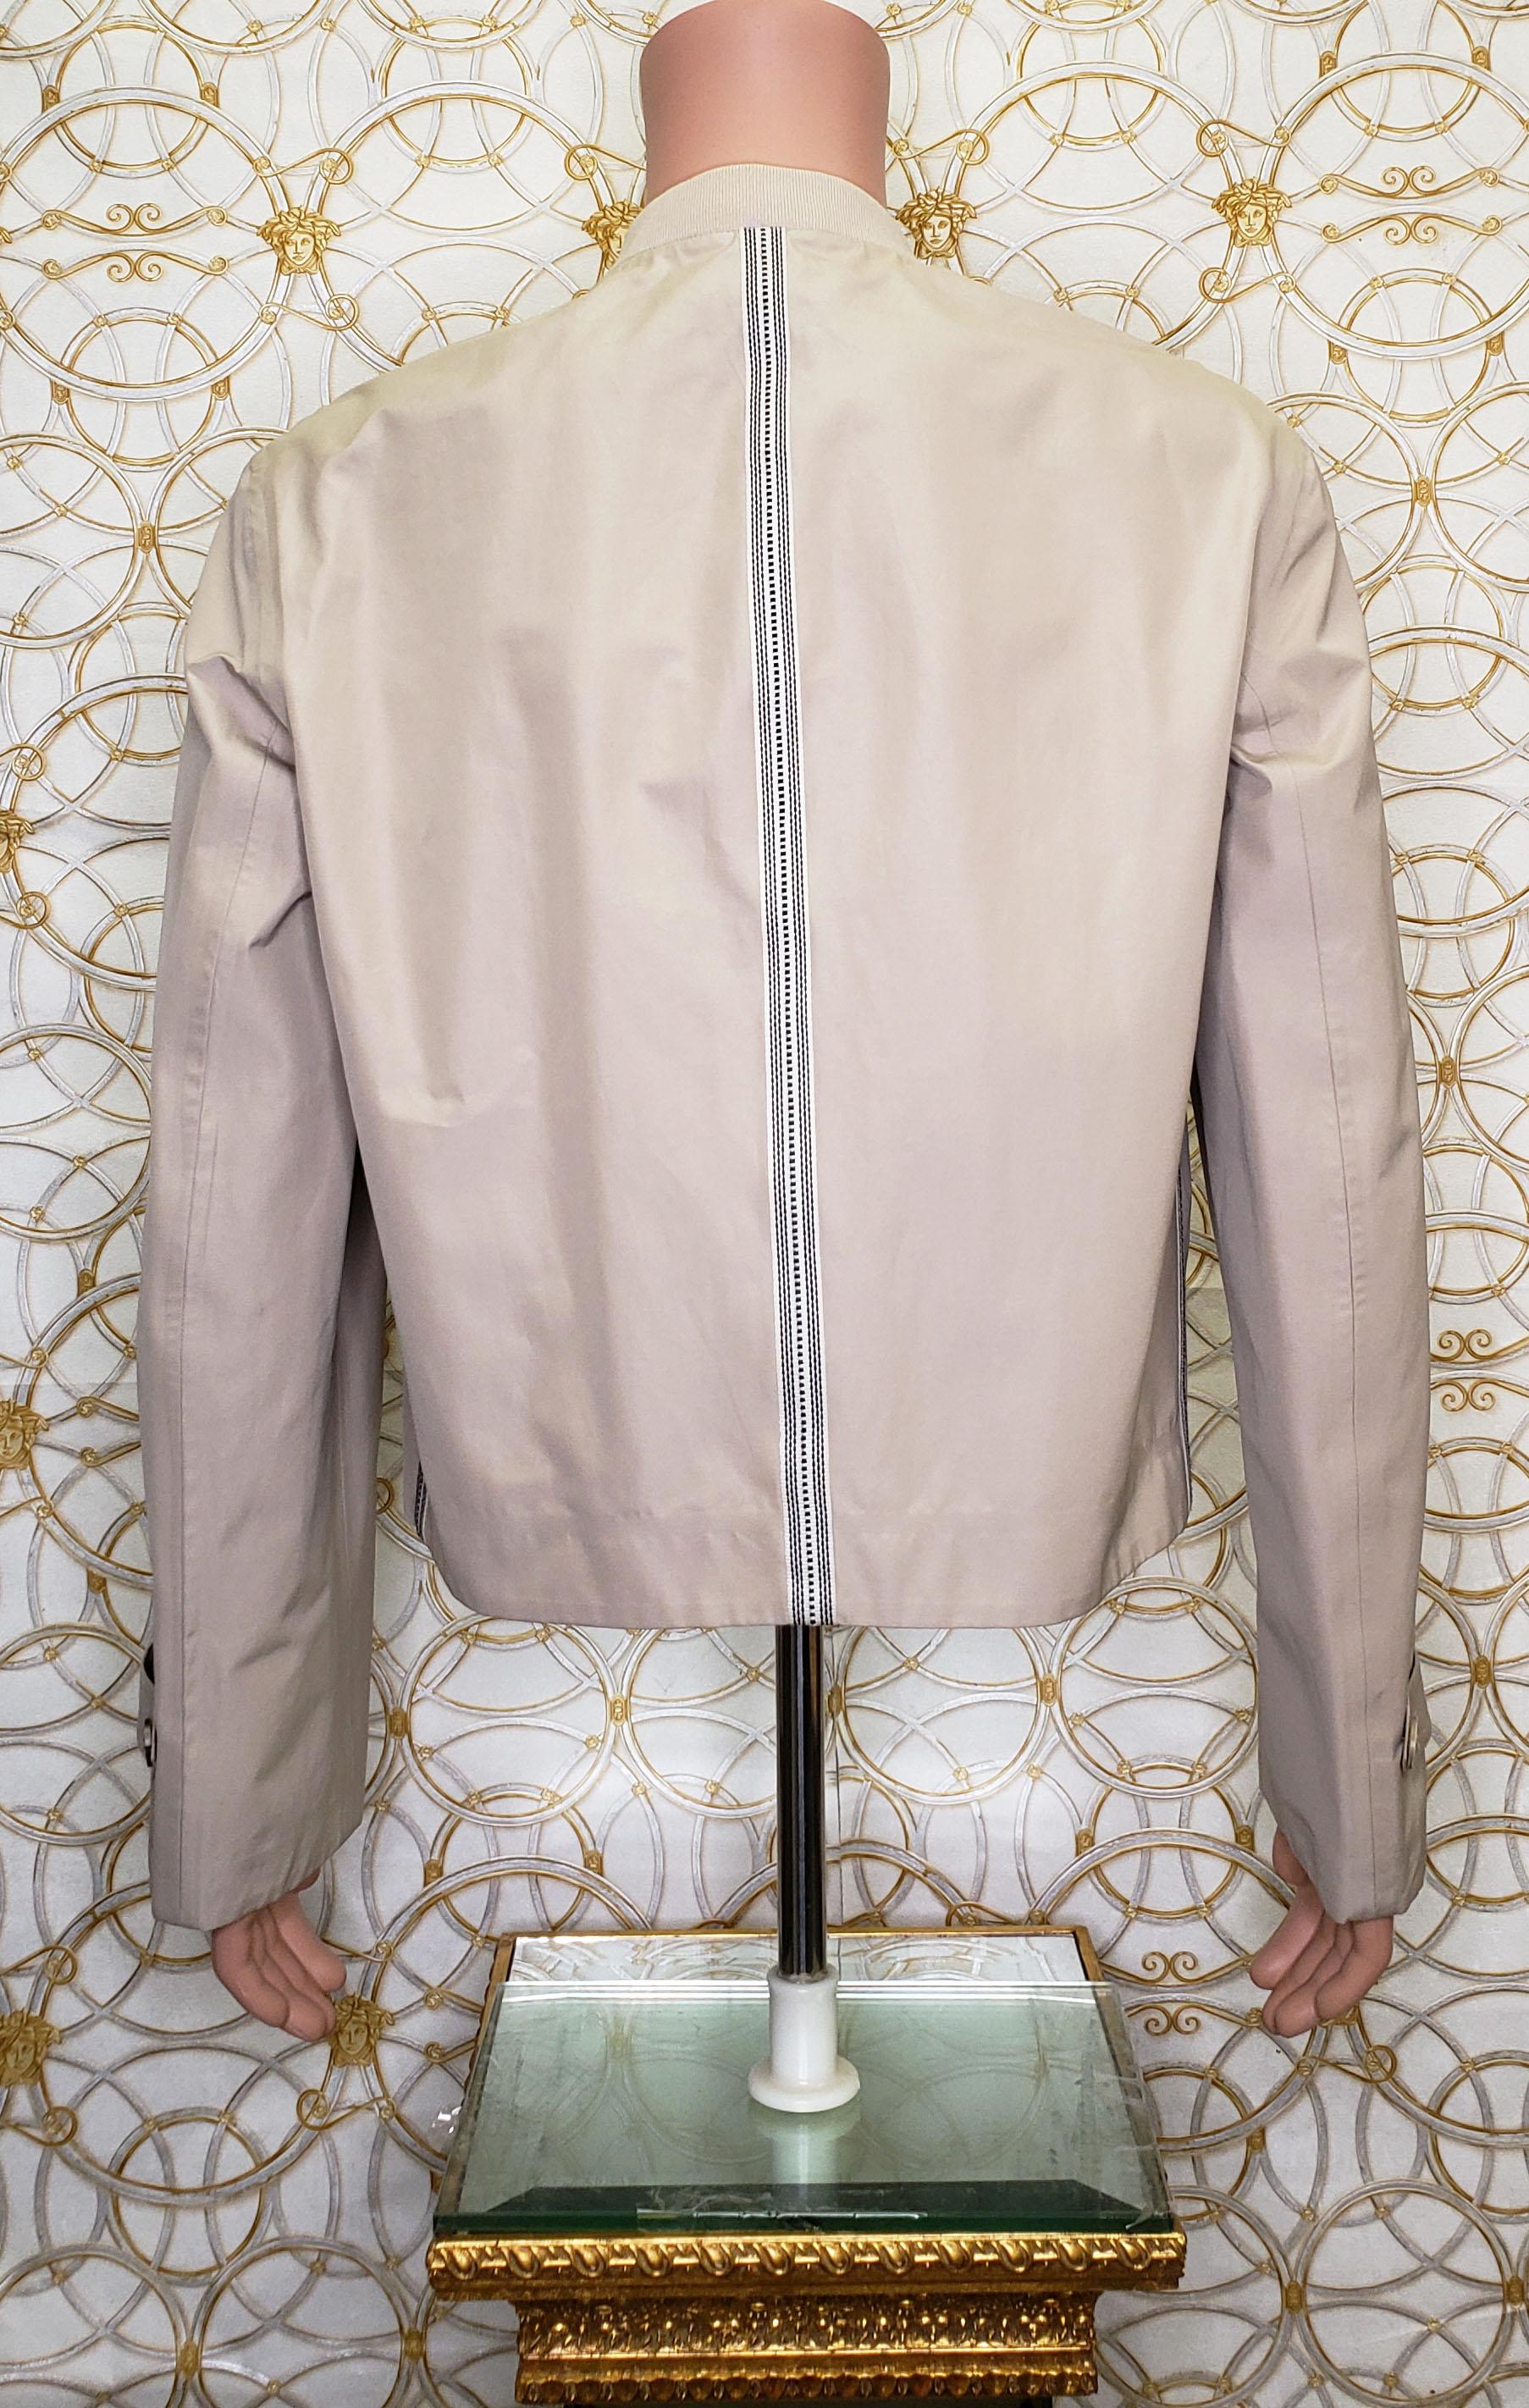 S/S 2016 L#17 NEW VERSACE BEIGE BOMBER JACKET with ZIPPER CLOSURE 50 - 40 For Sale 2